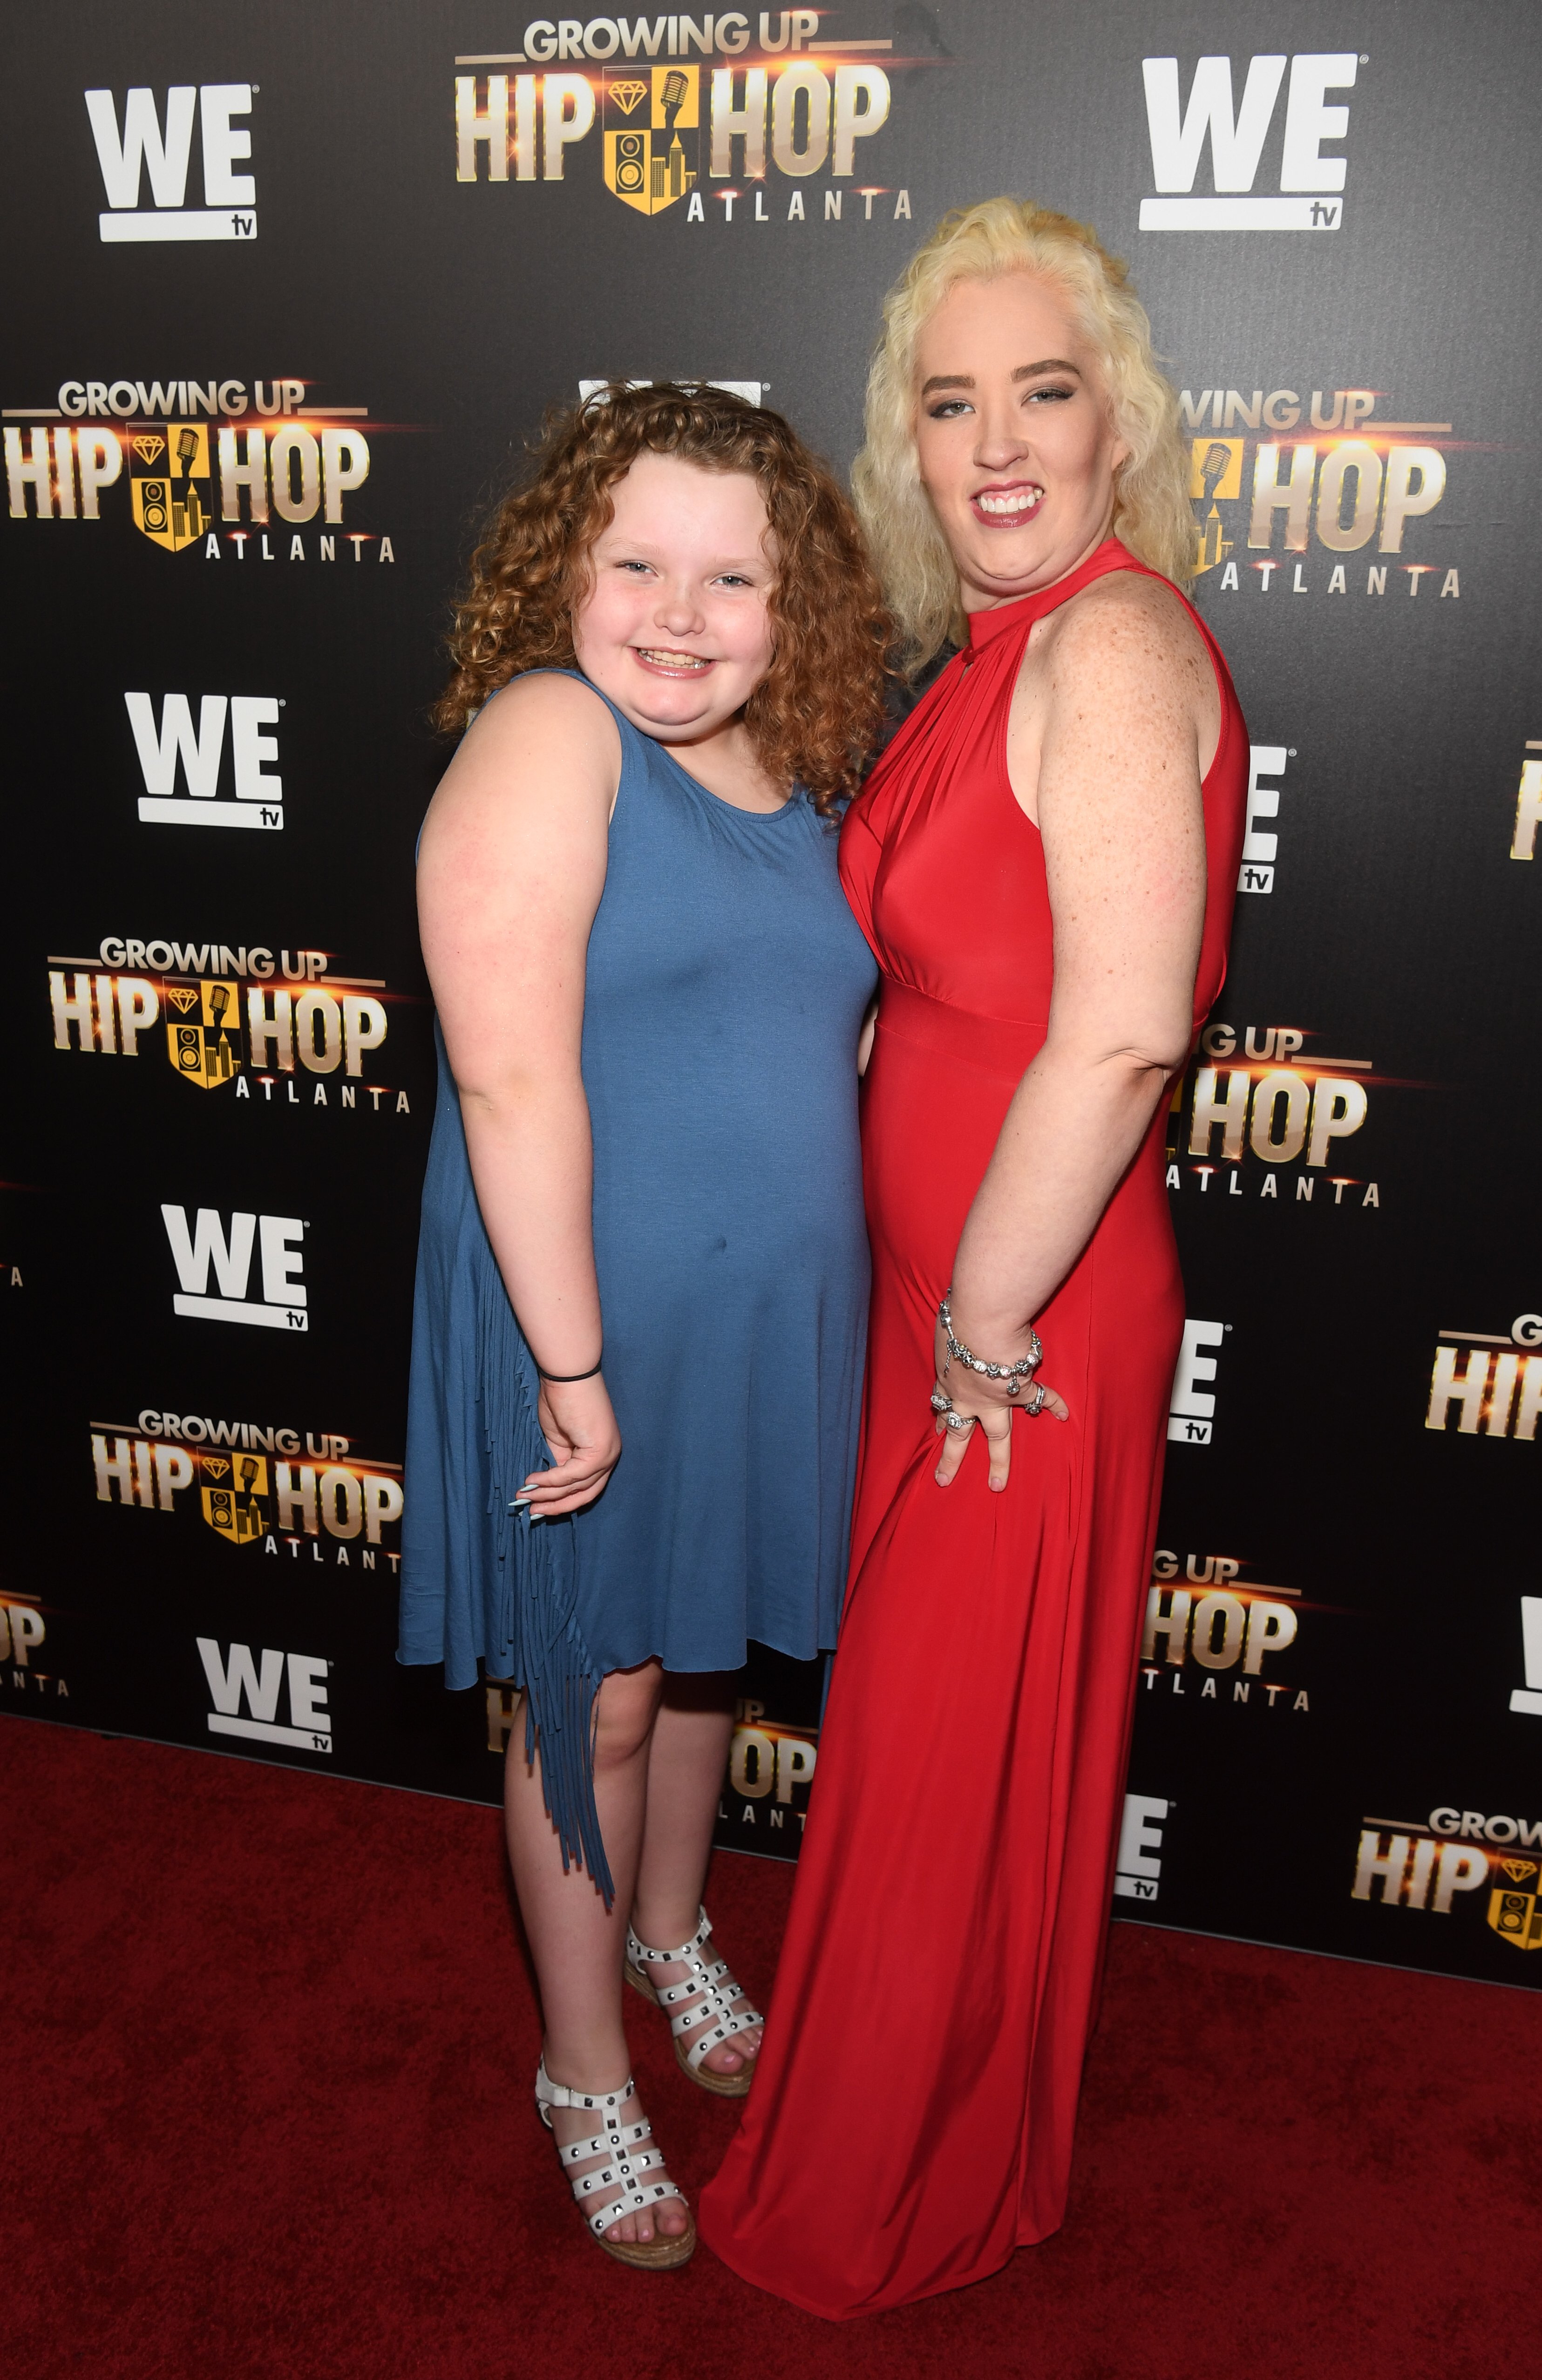 June Shannon and her daughter Alana Thompson attend the premiere for "Growing Up Hip Hop Atlanta in Atlanta, Georgia on May 23, 2017 | Photo: Getty Images